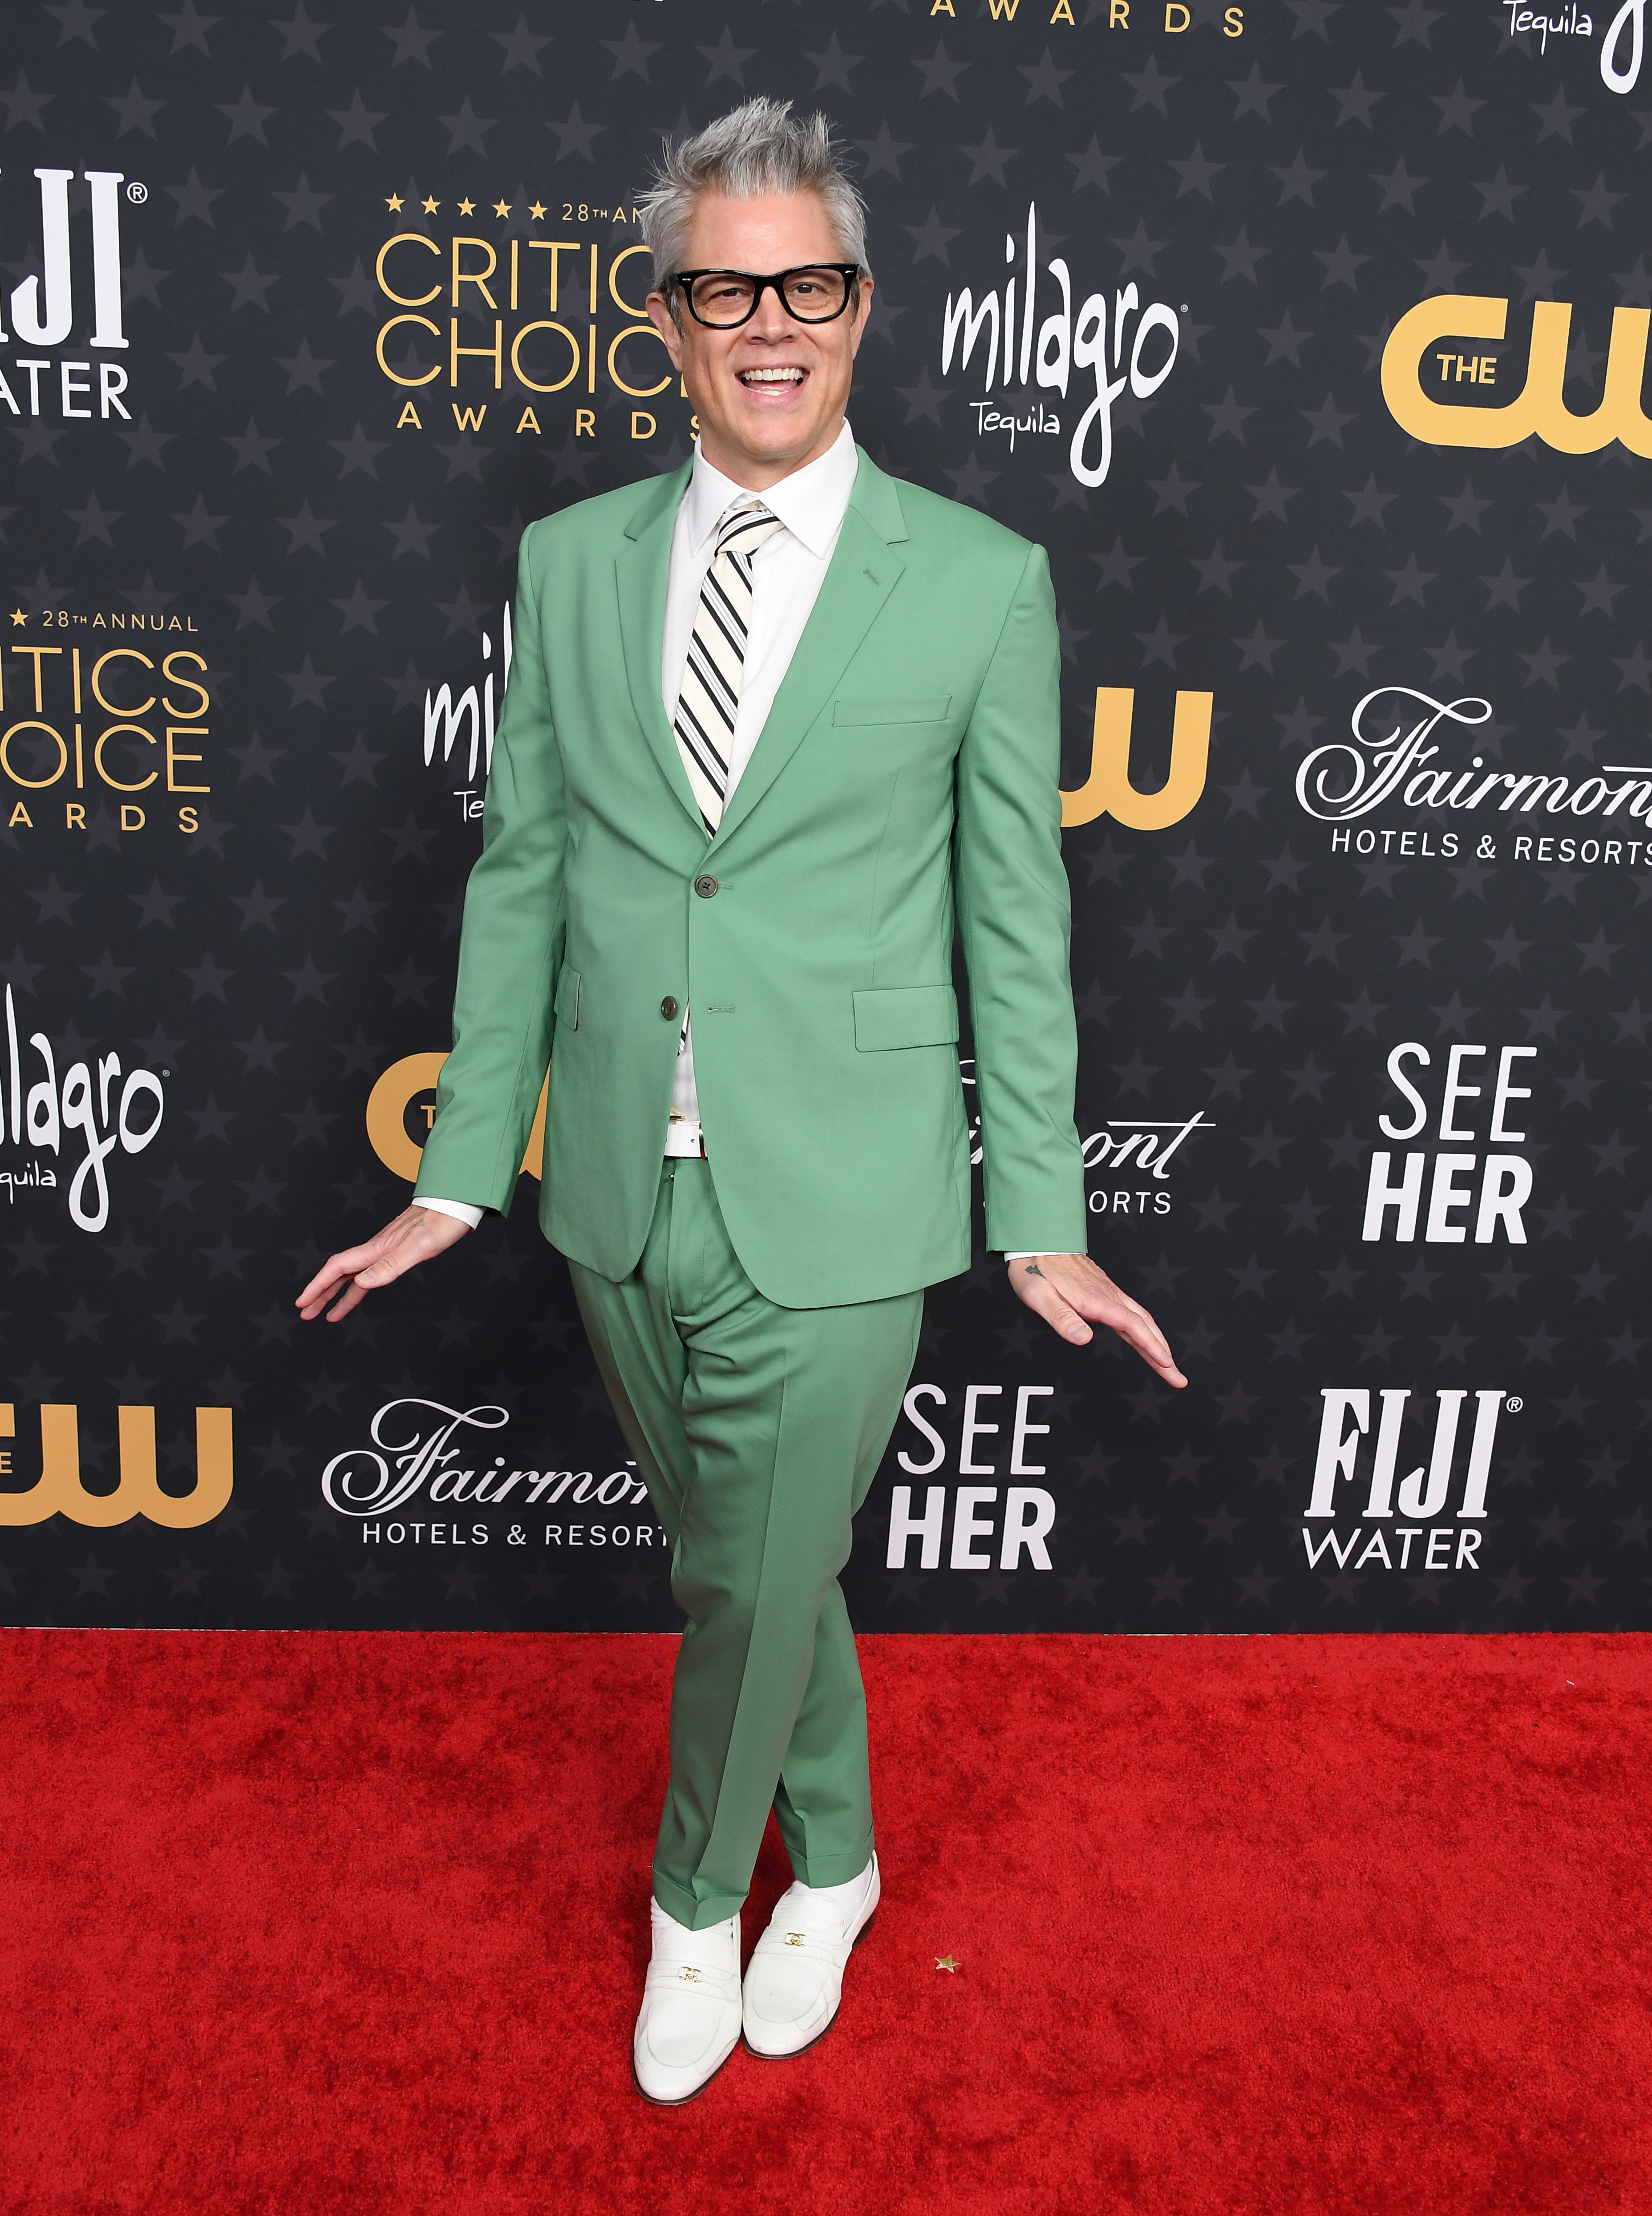 Johnny in ga suit and shoes on red carpet posing with his feet crossed together and hands out to his side at Critics Choice Awards